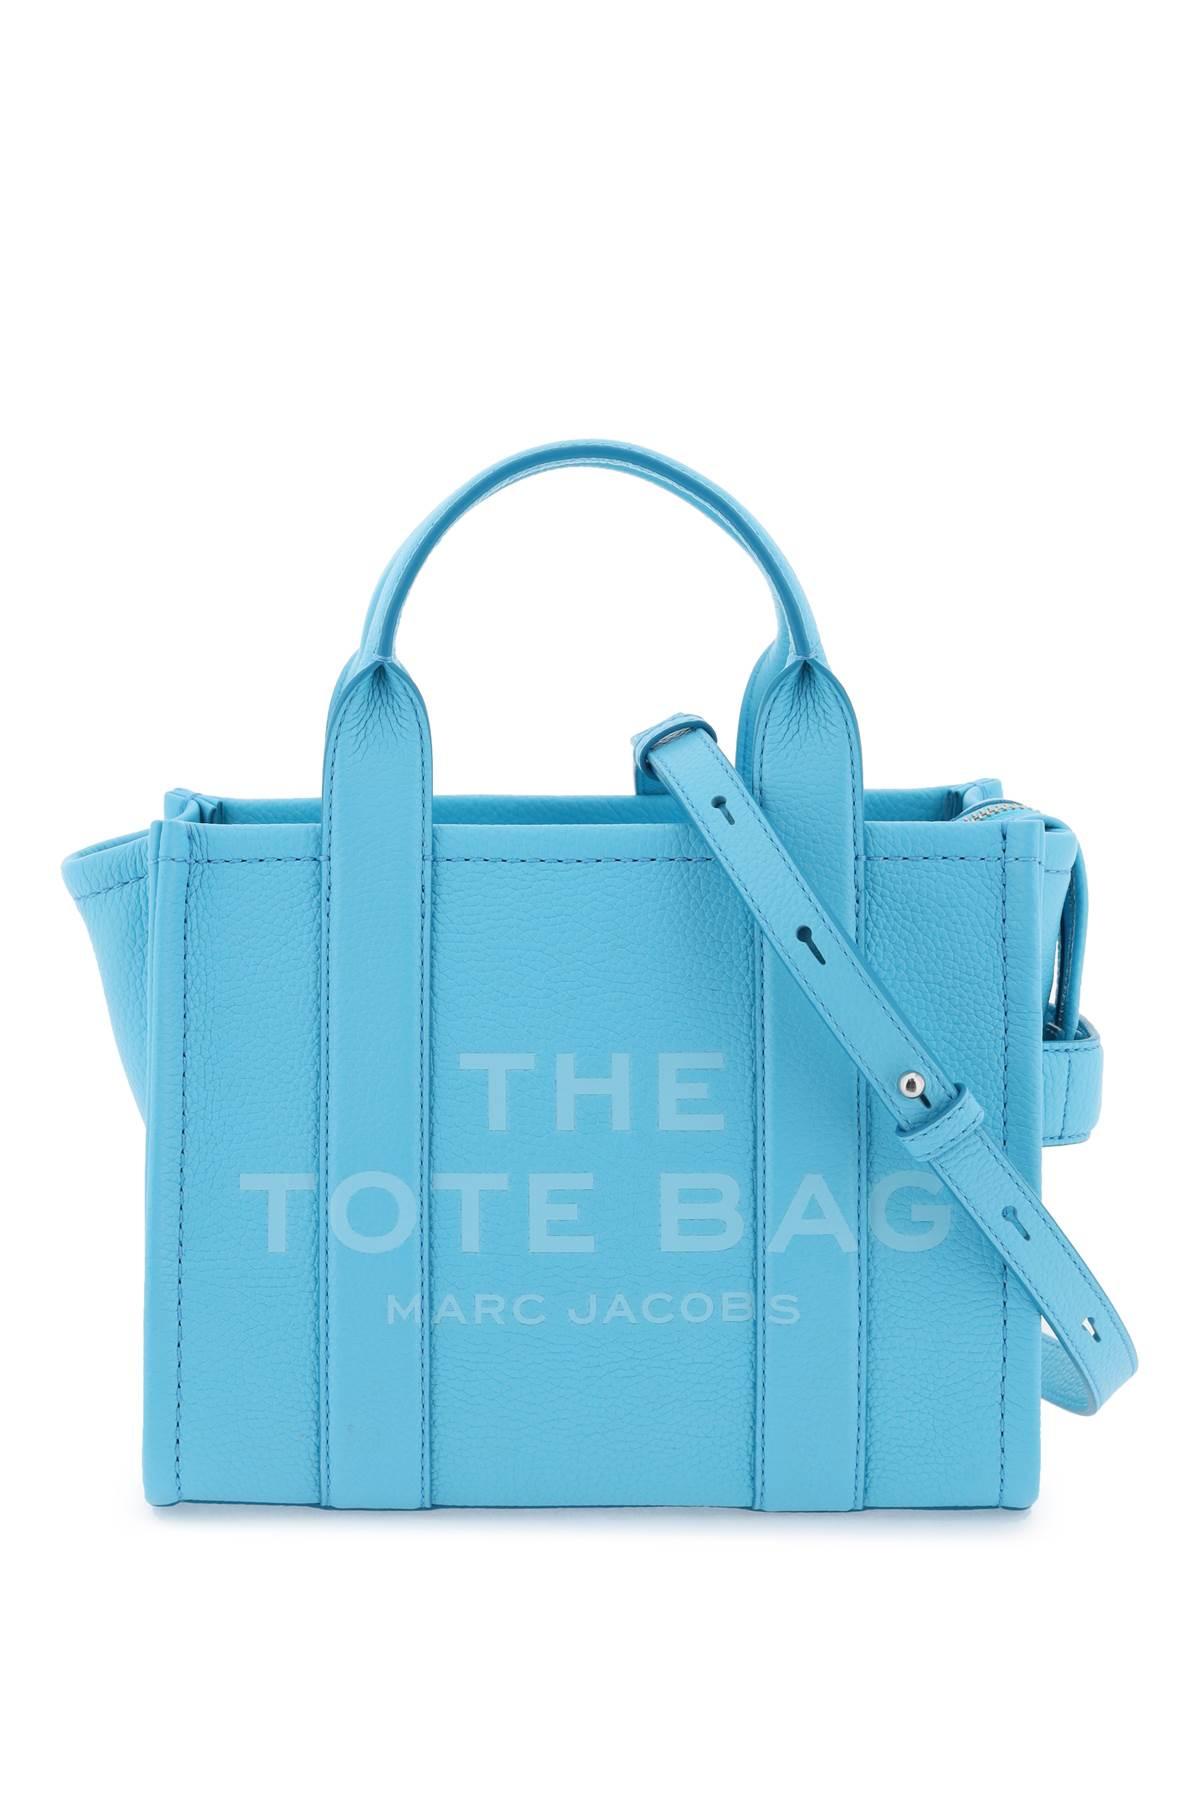 Shop Marc Jacobs The Leather Small Tote